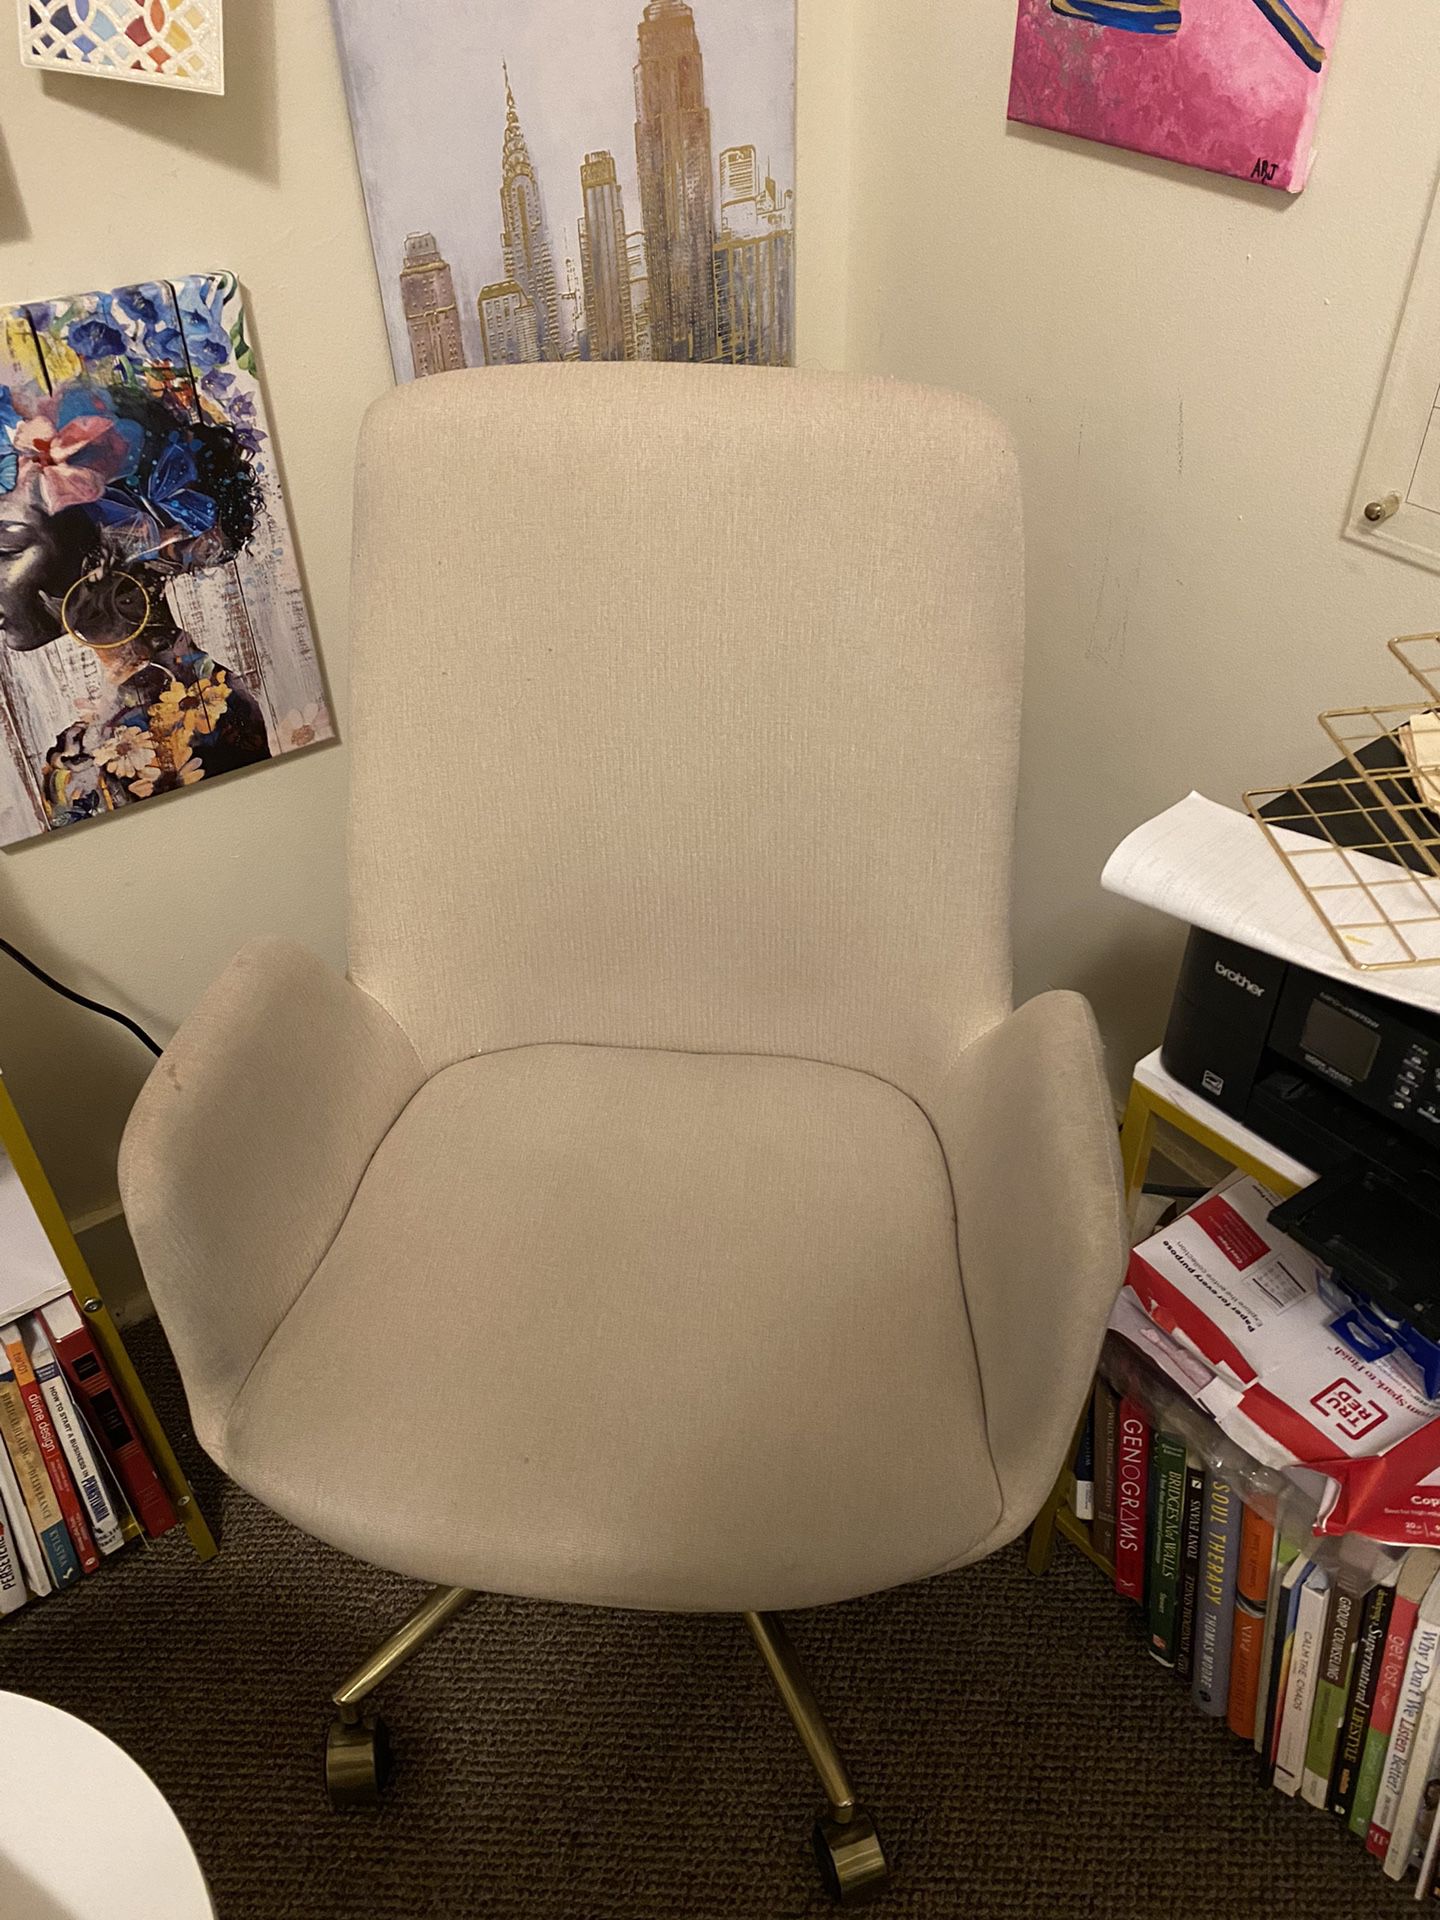 Computer Desk Chair - Used